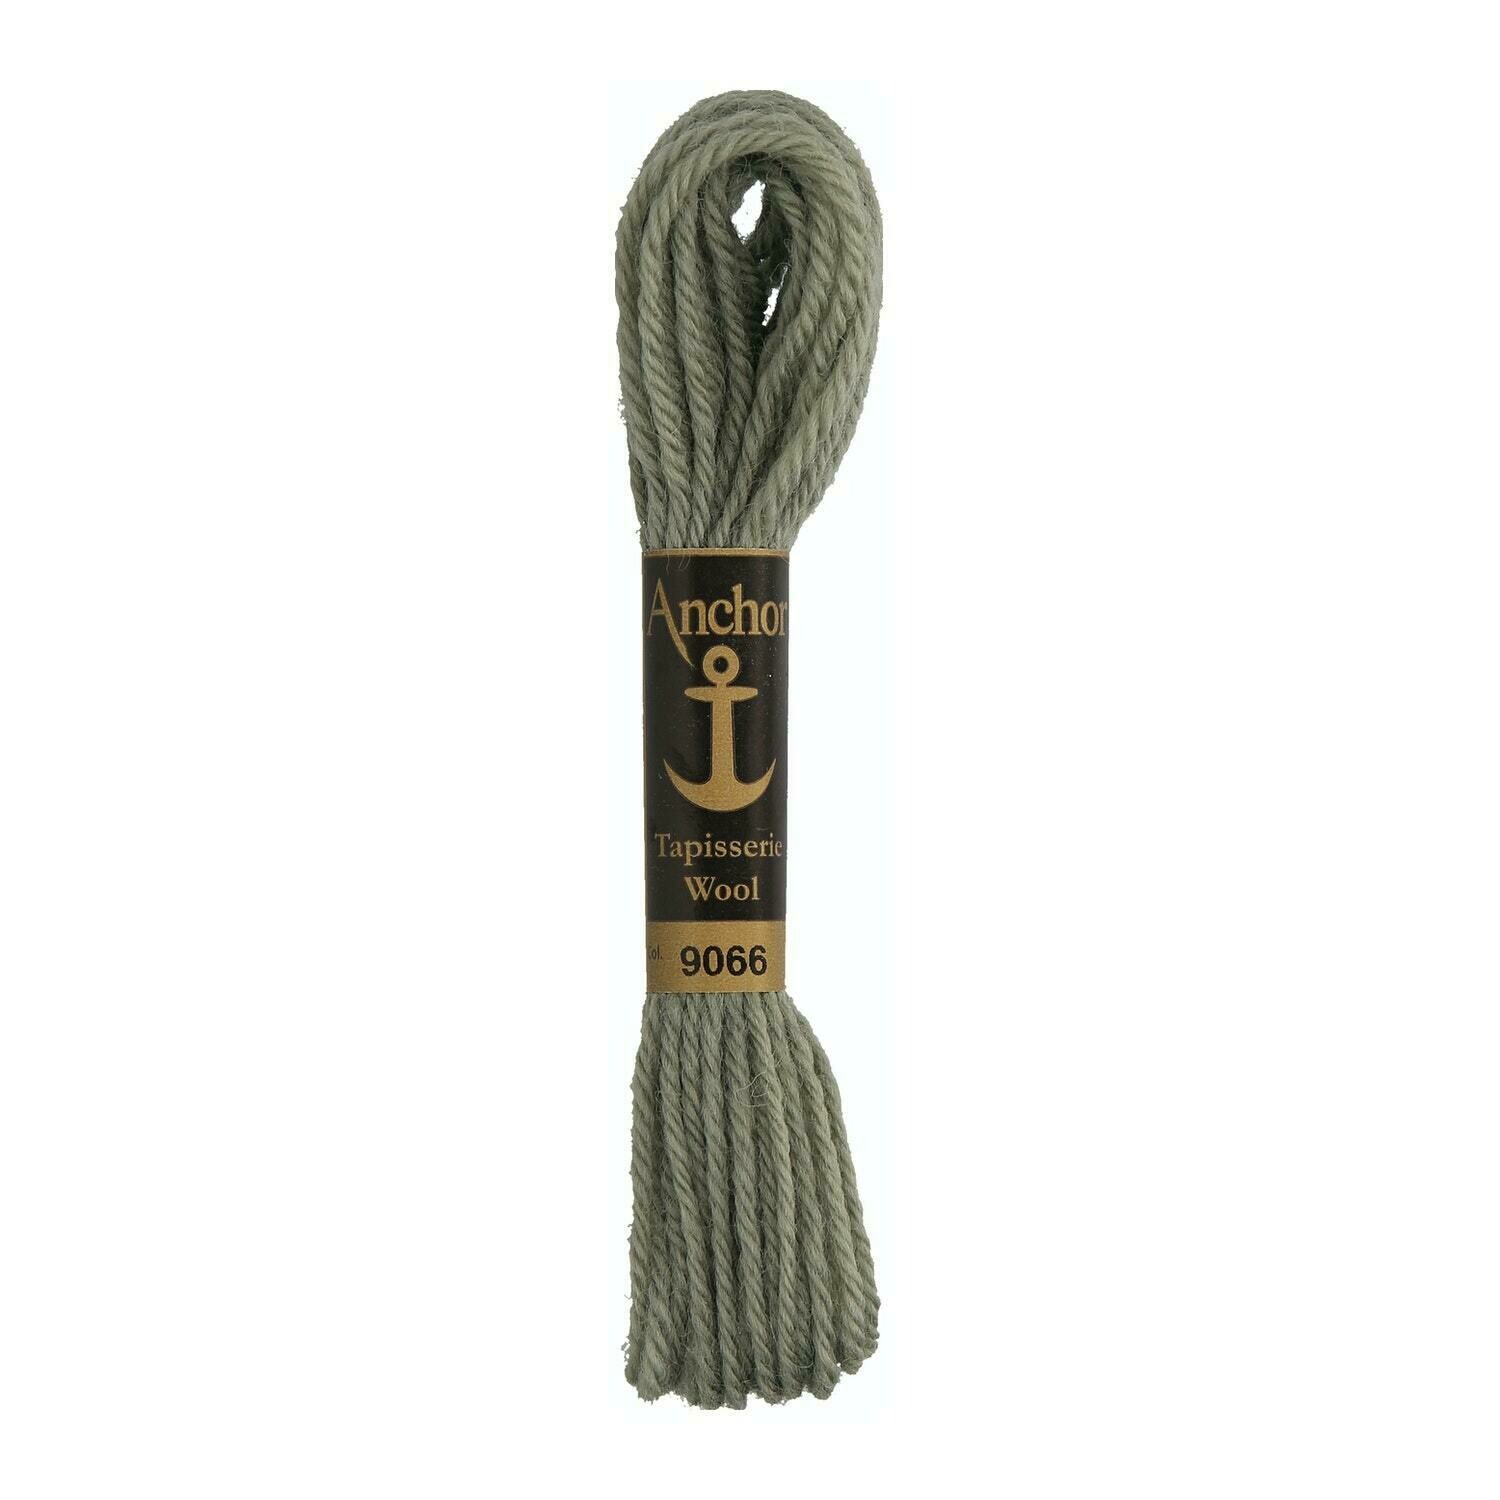 Anchor Tapisserie Wool #09066